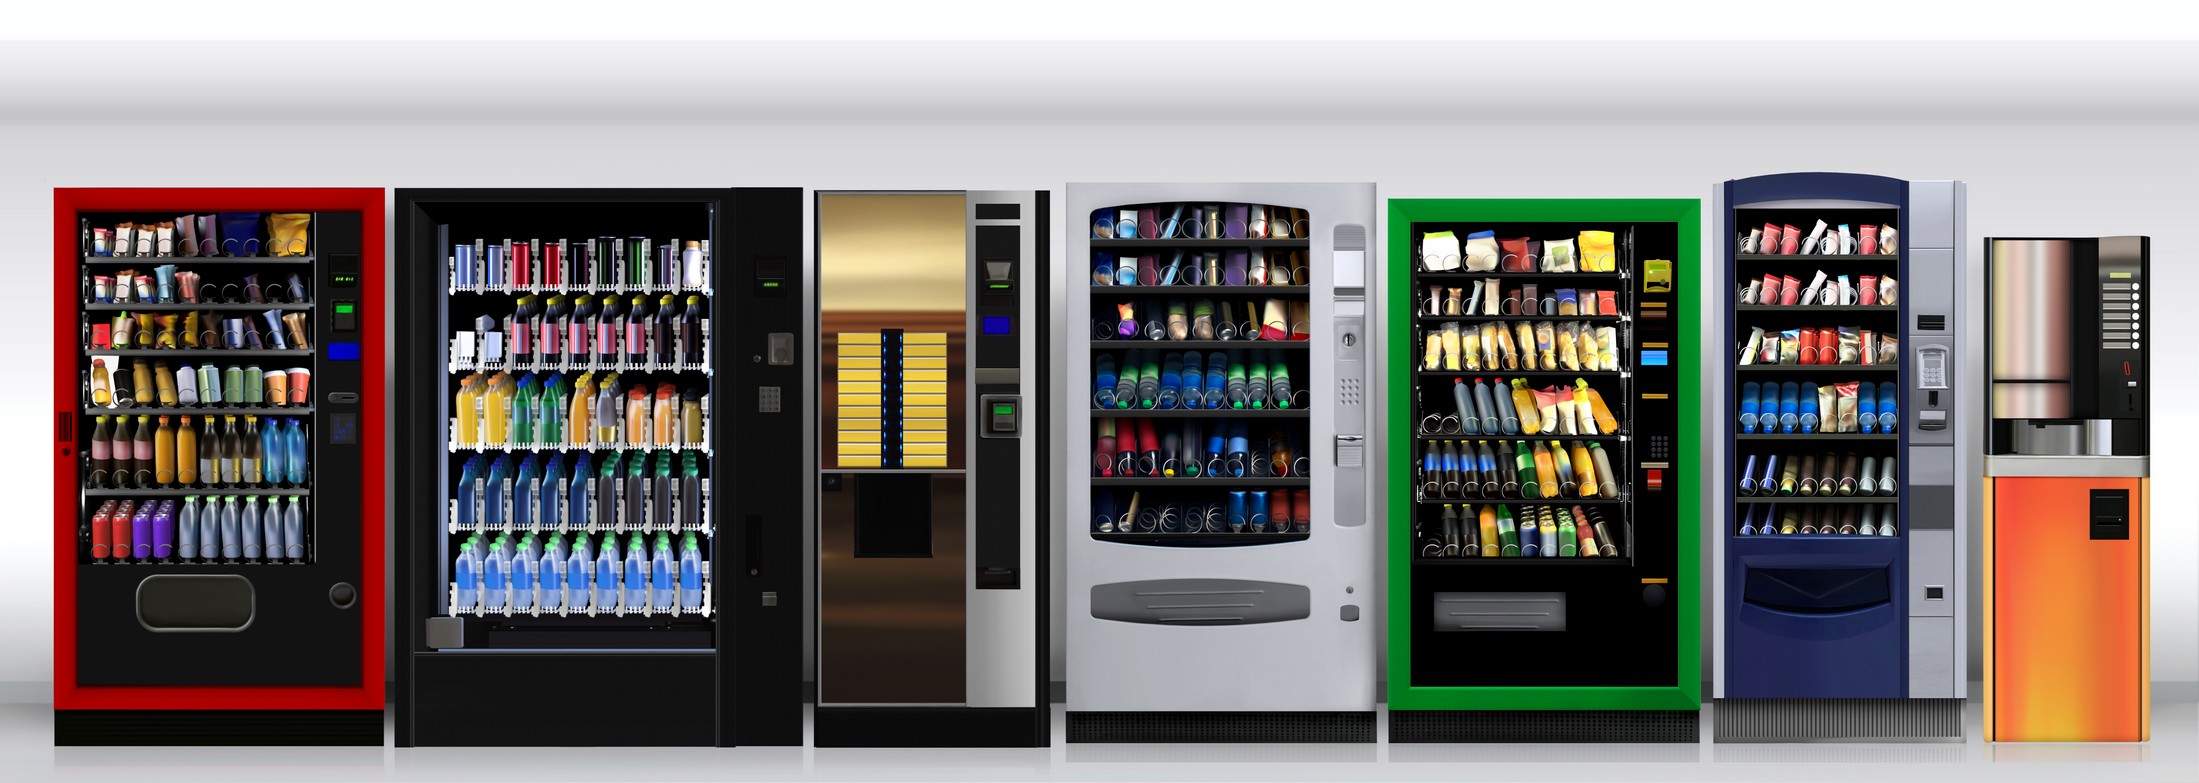 Columbia, MD Office Snacks | Office Refreshments | Vending Technology